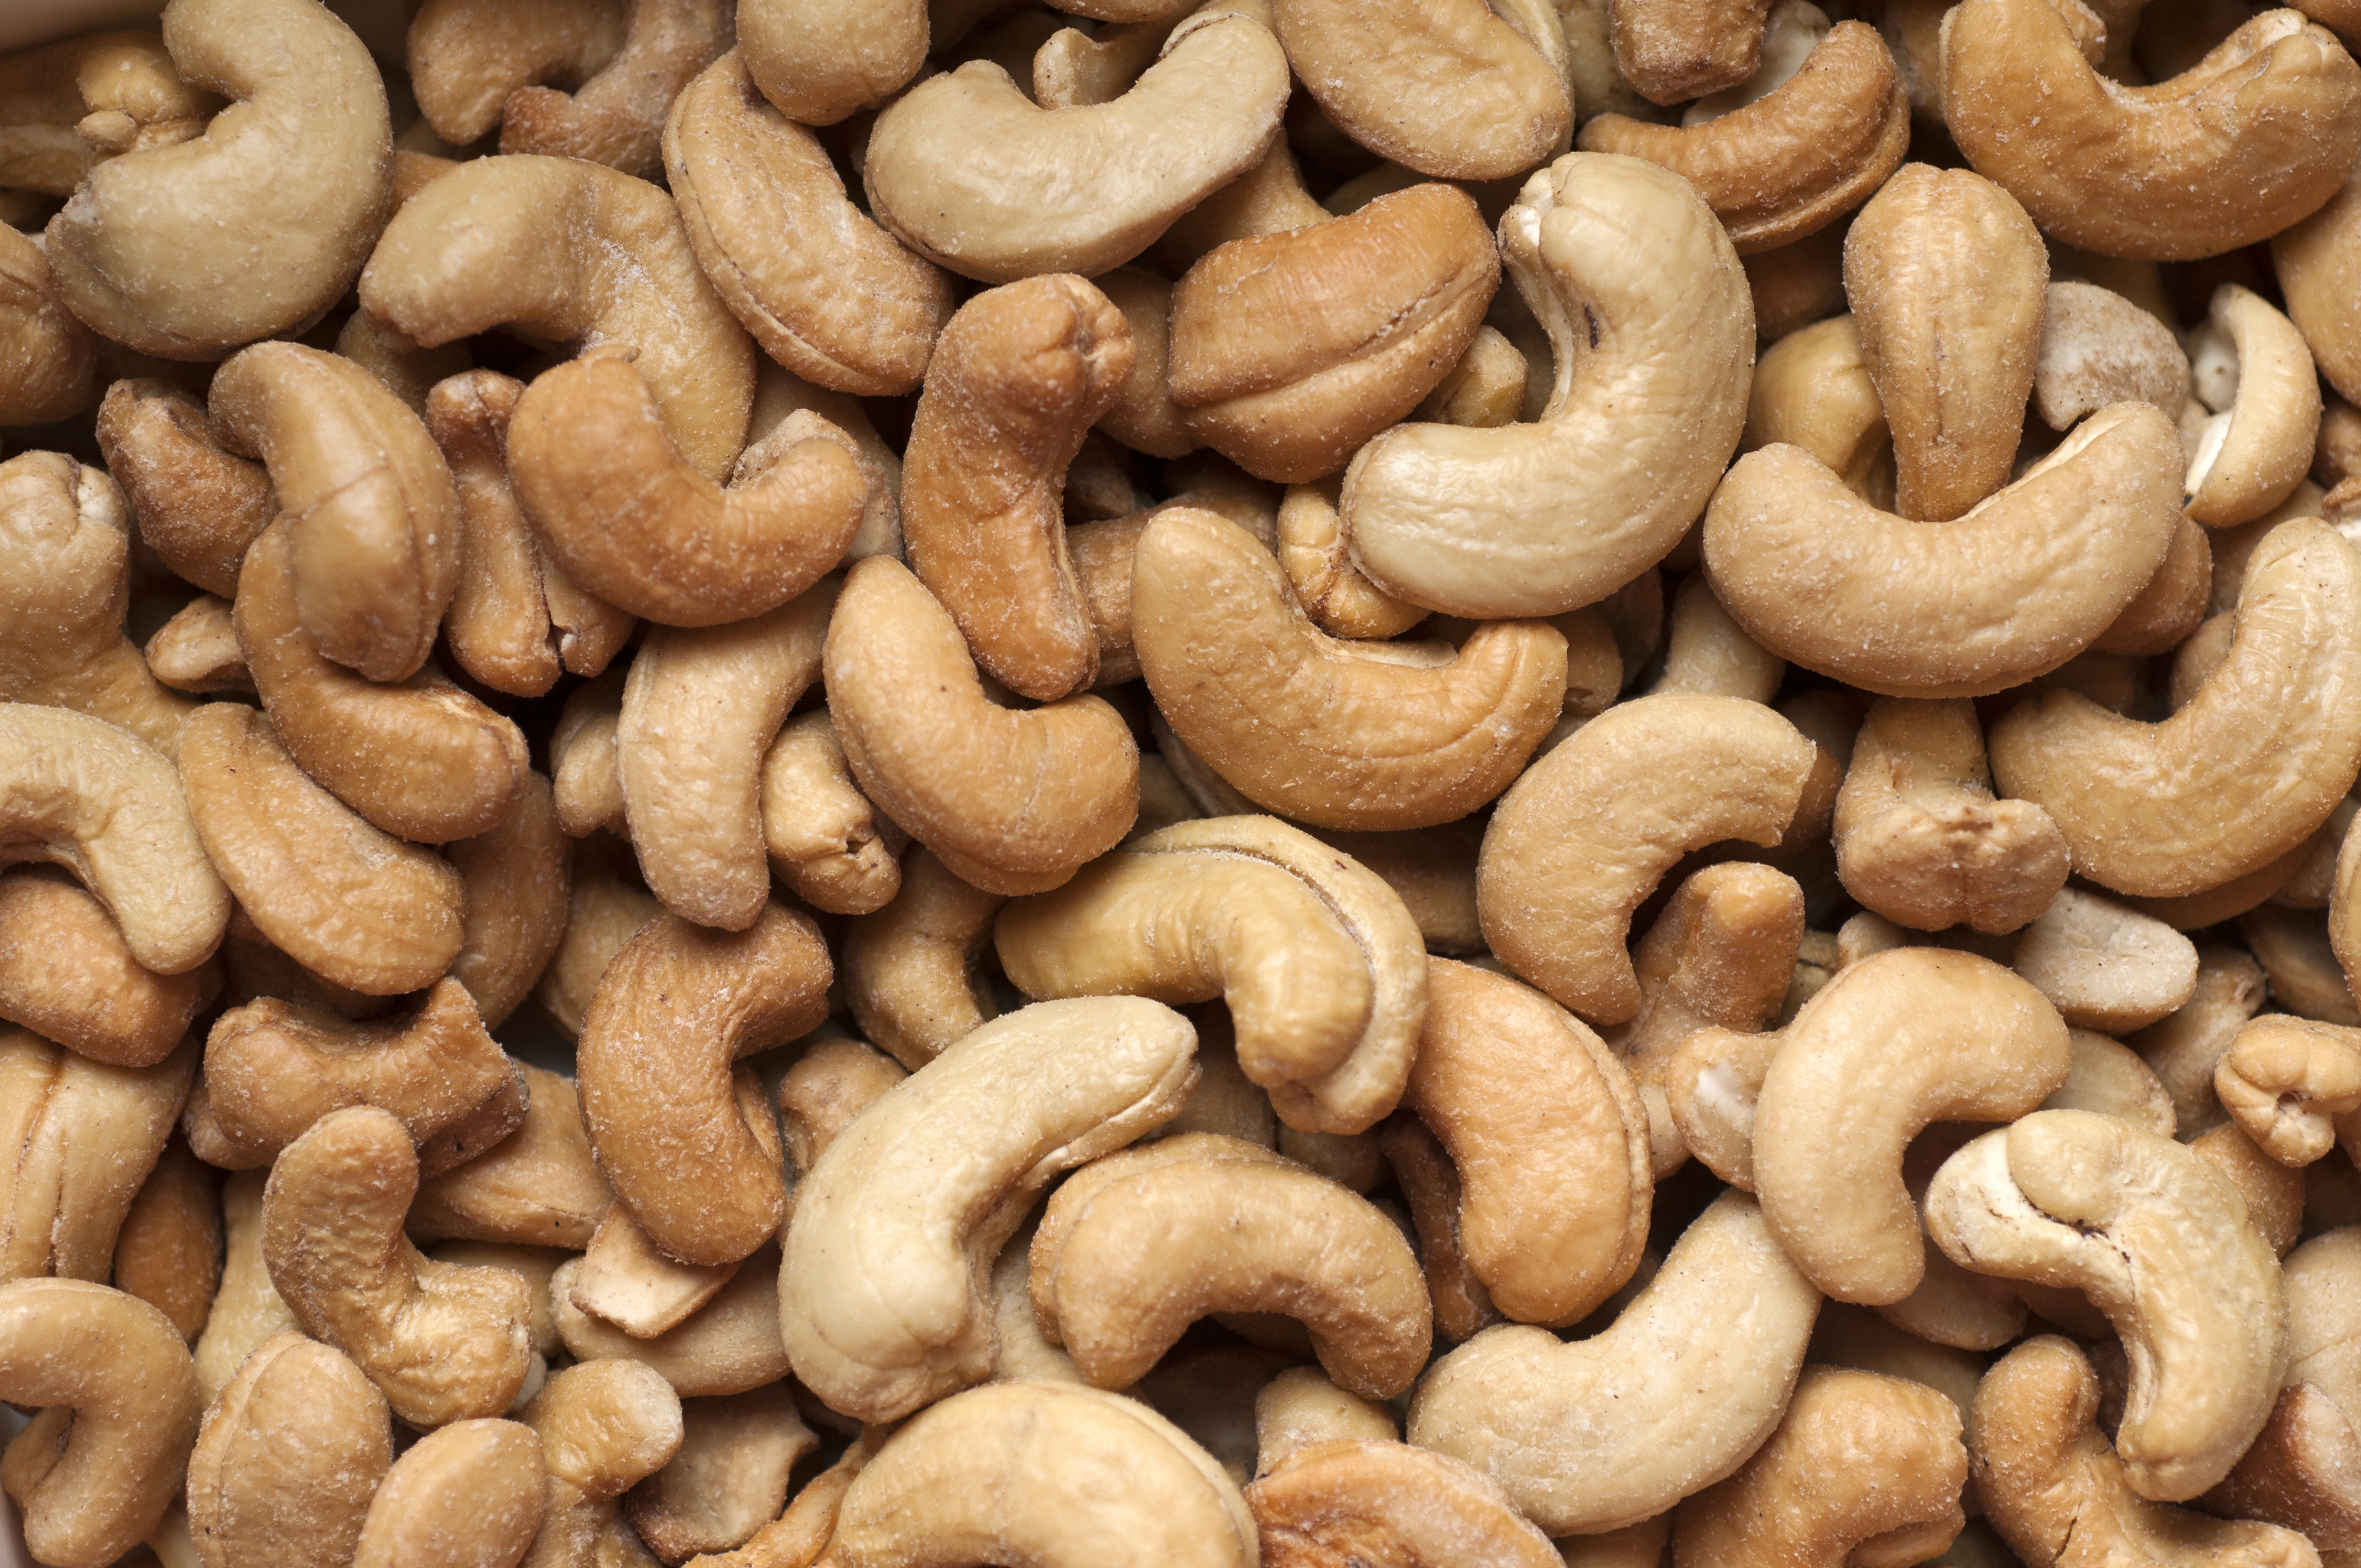 A close-up view of multiple cashew nuts